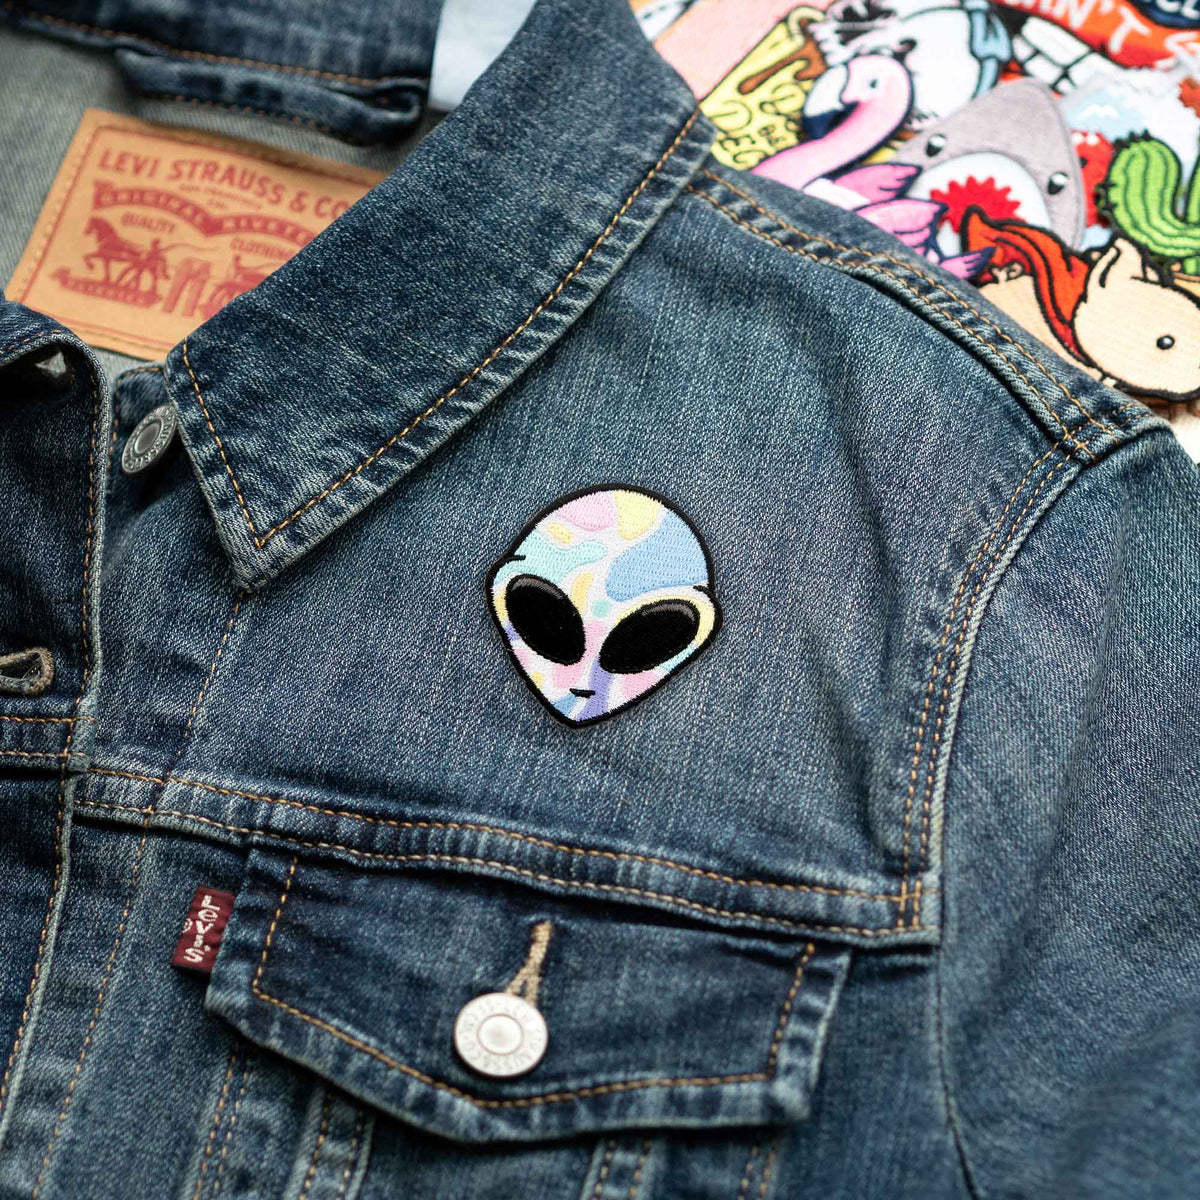 Alien Patch Et Patches Cool Iron On Patches Funny Patches For Jackets